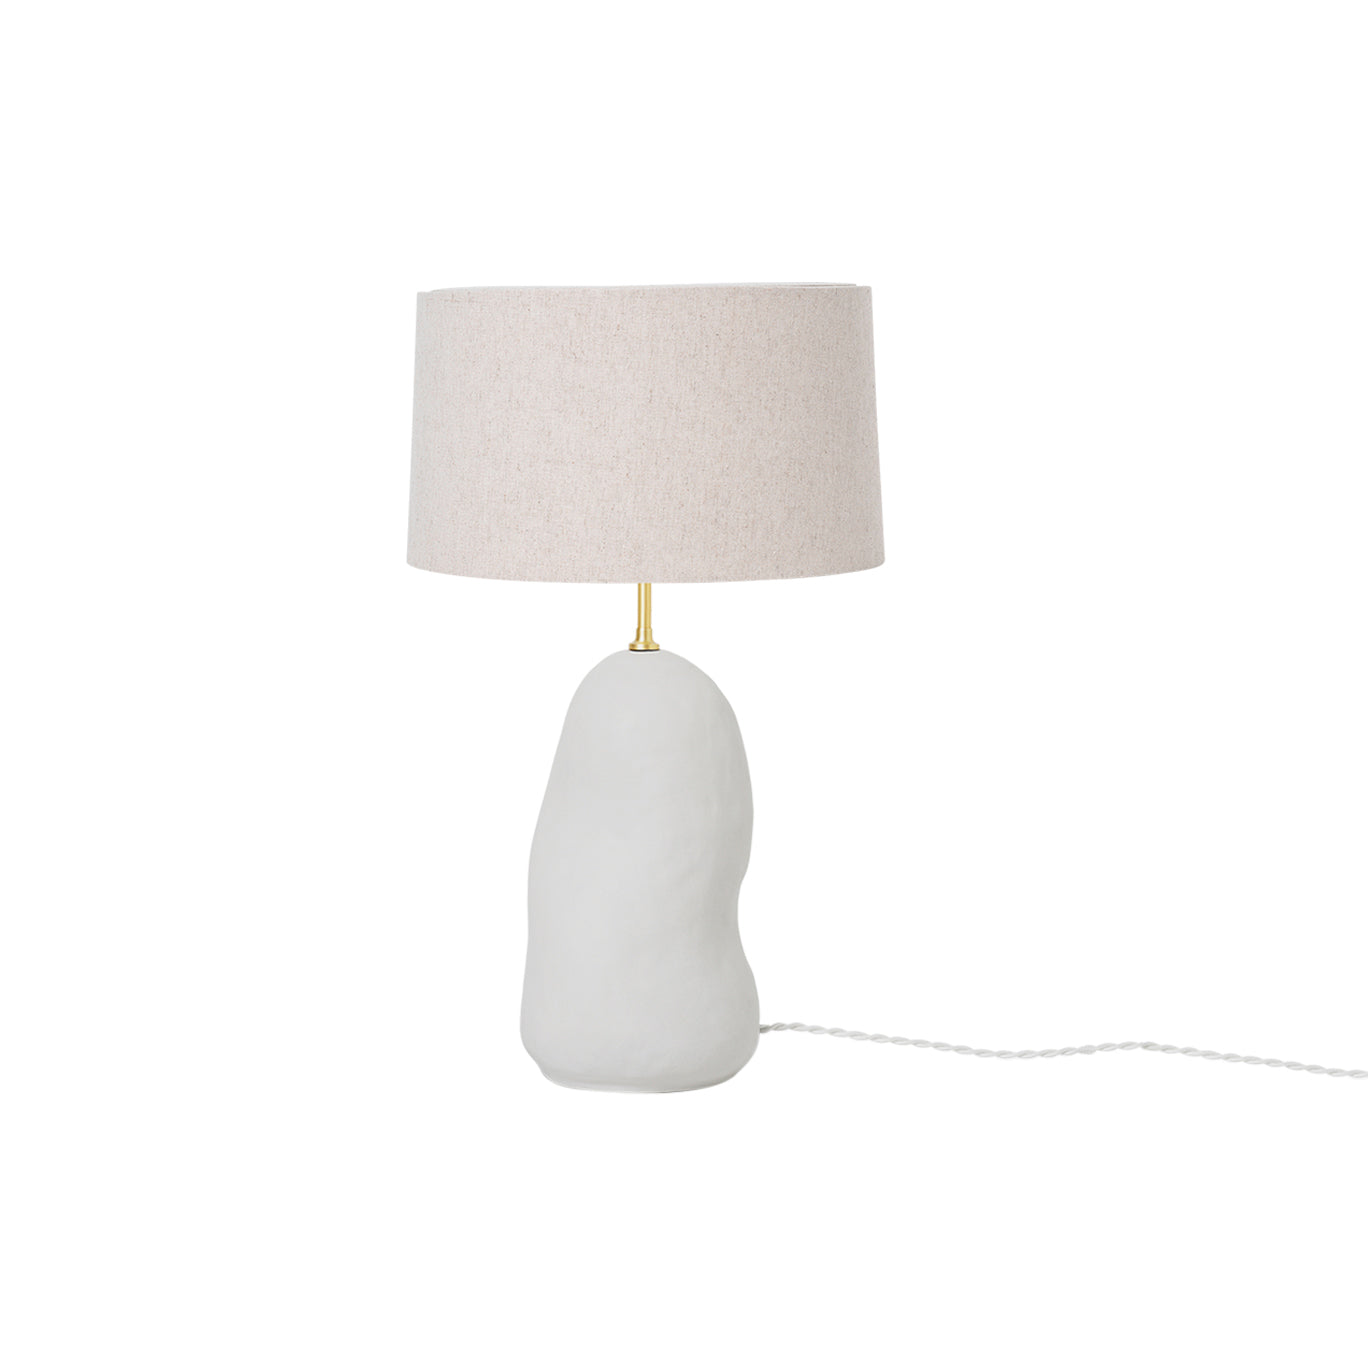 Hebe Lamp: Small + Natural + Off-White